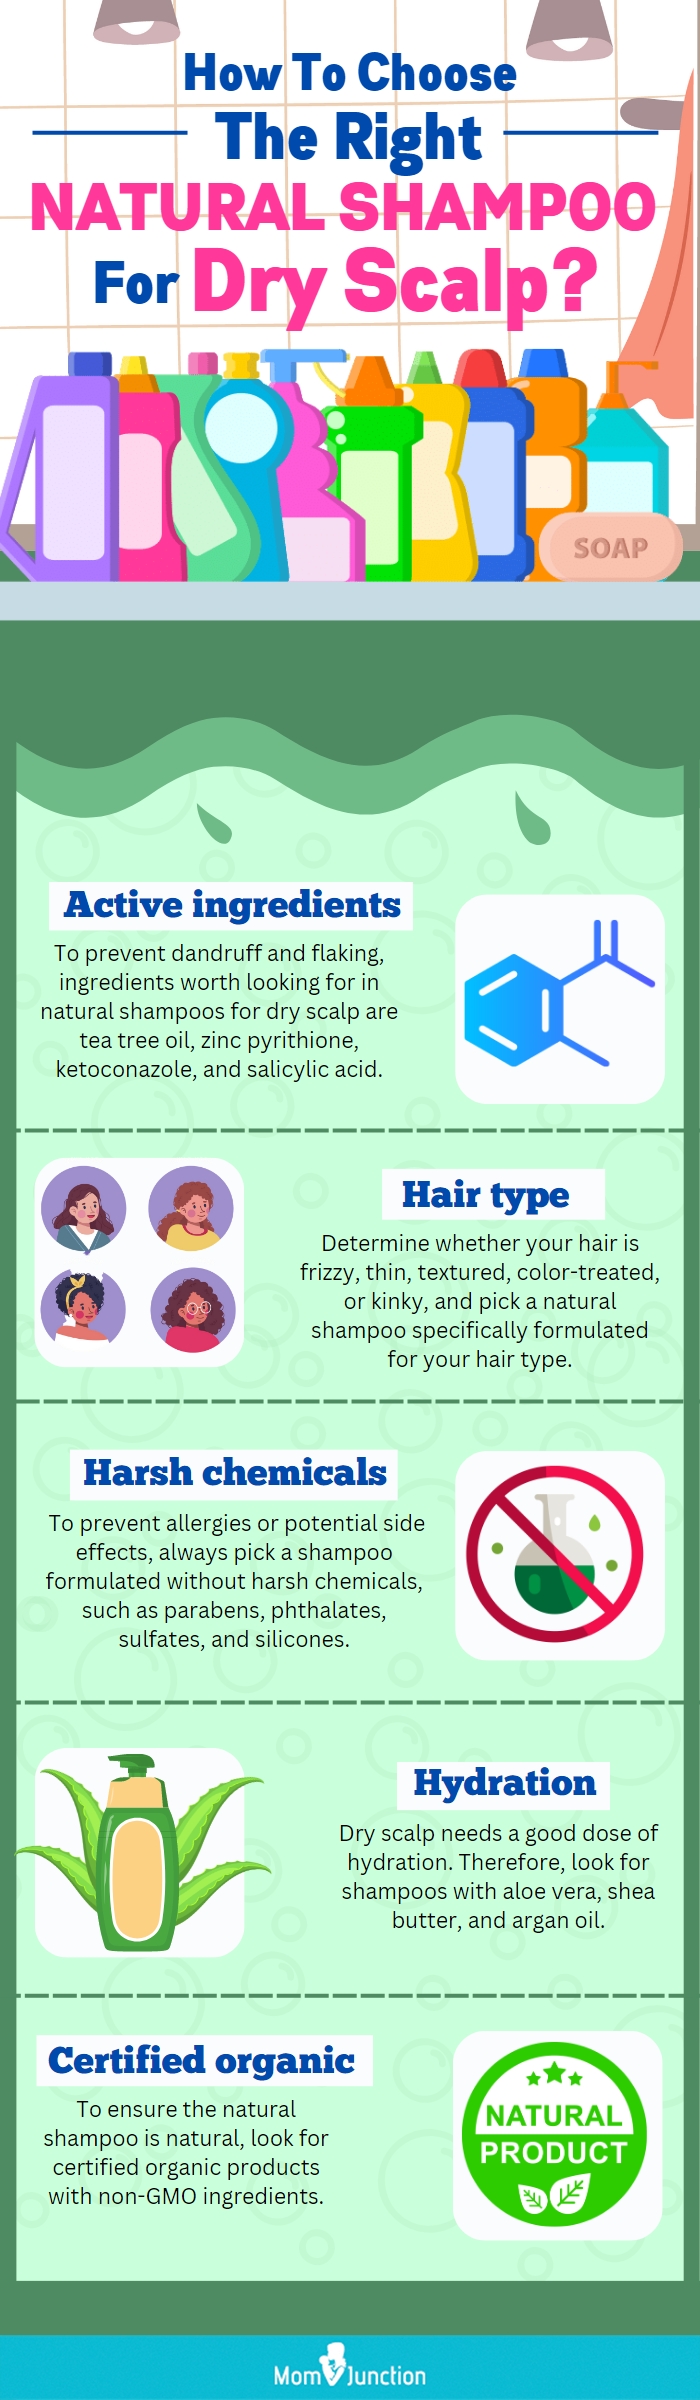 How To Choose The Right Natural Shampoo For Dry Scalp (infographic)